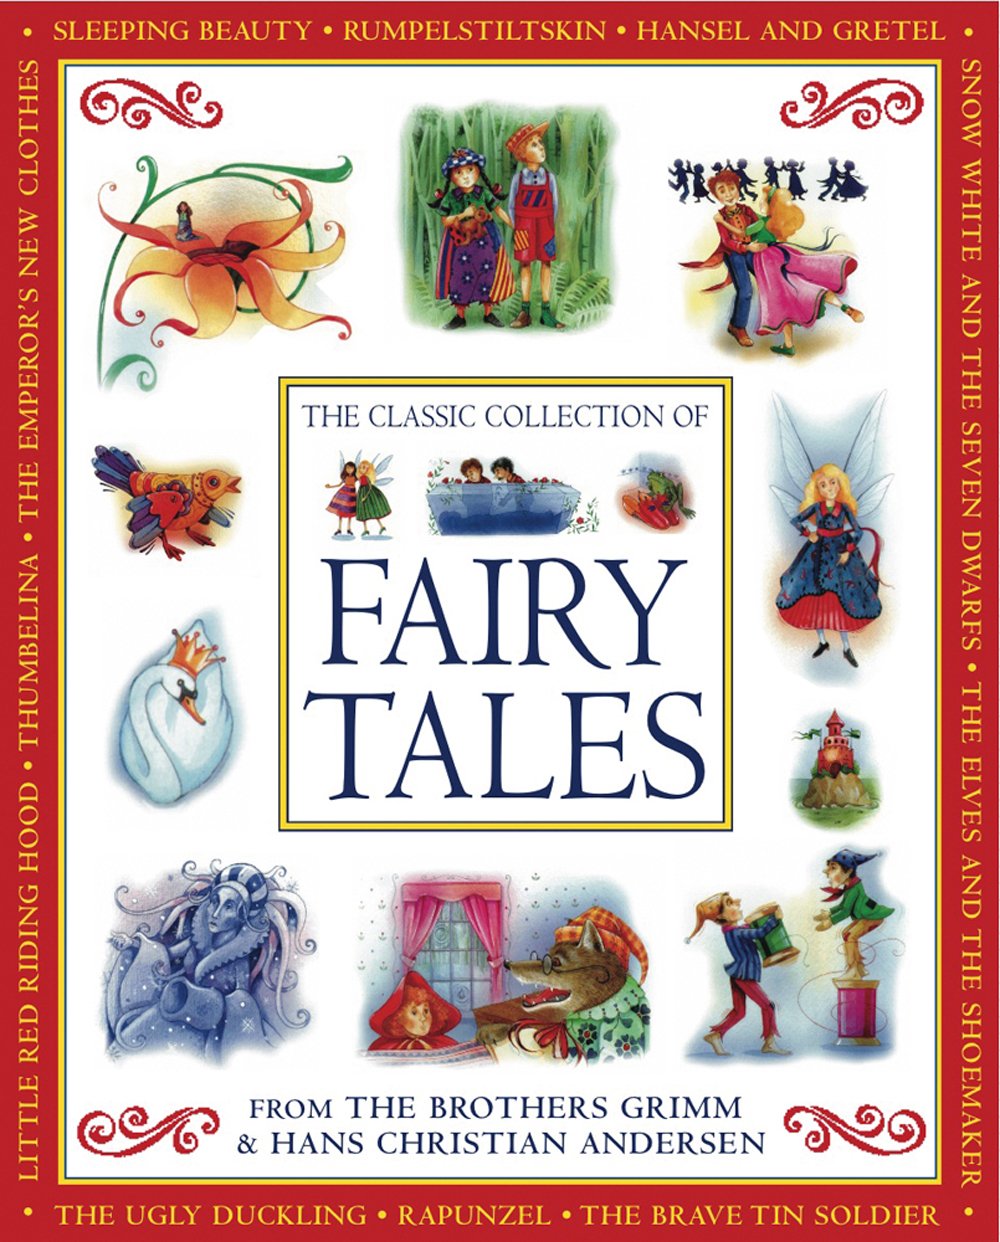 The Classic Collection of Fairy Tales